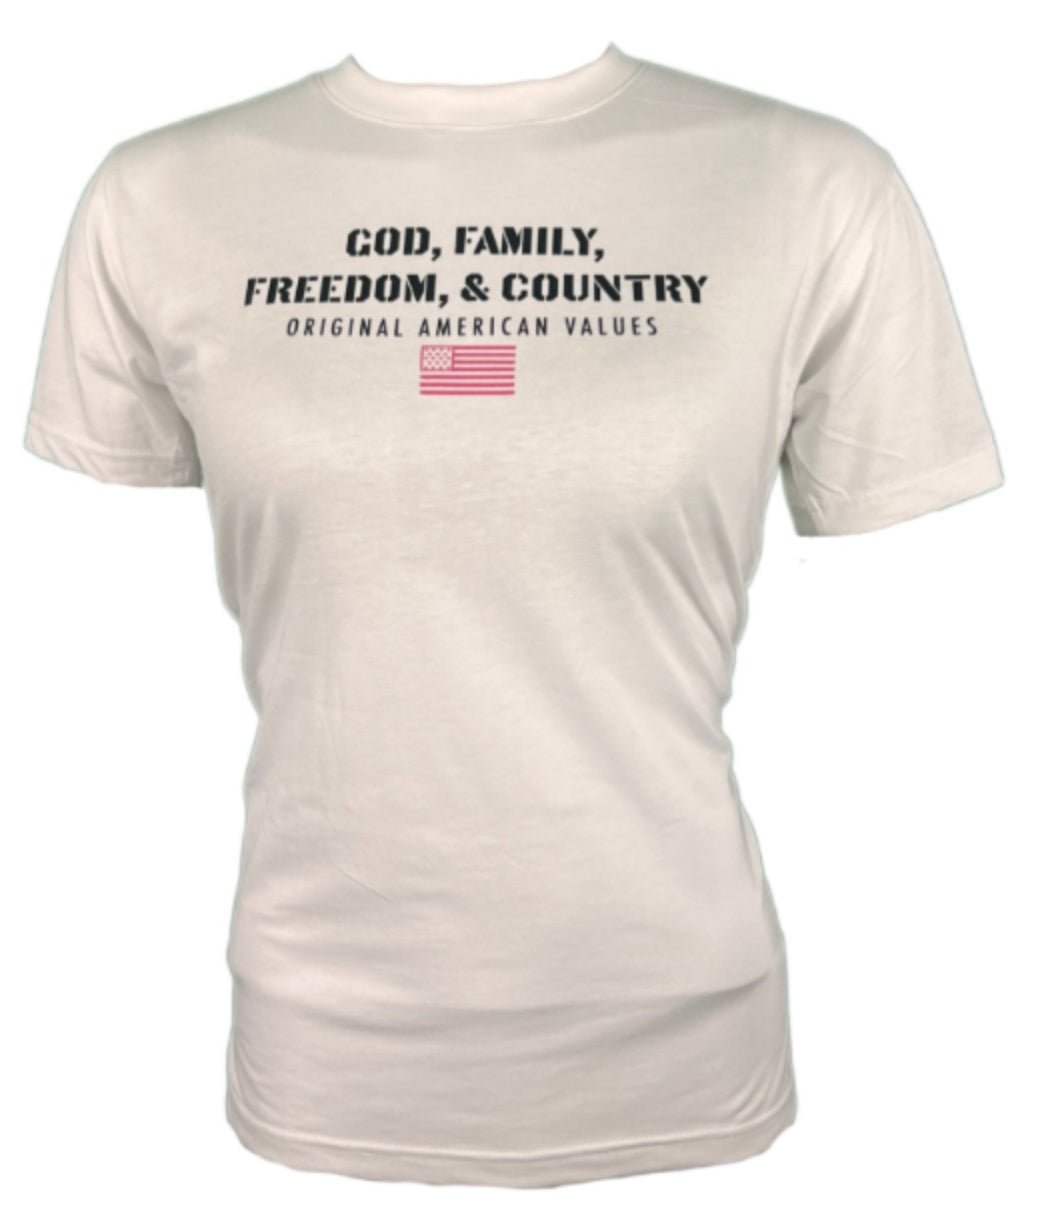 WOMEN’S GOD FAMILY FREEDOM. & COUNTRY T-SHIRT - WHITE - ALPHAunleashed